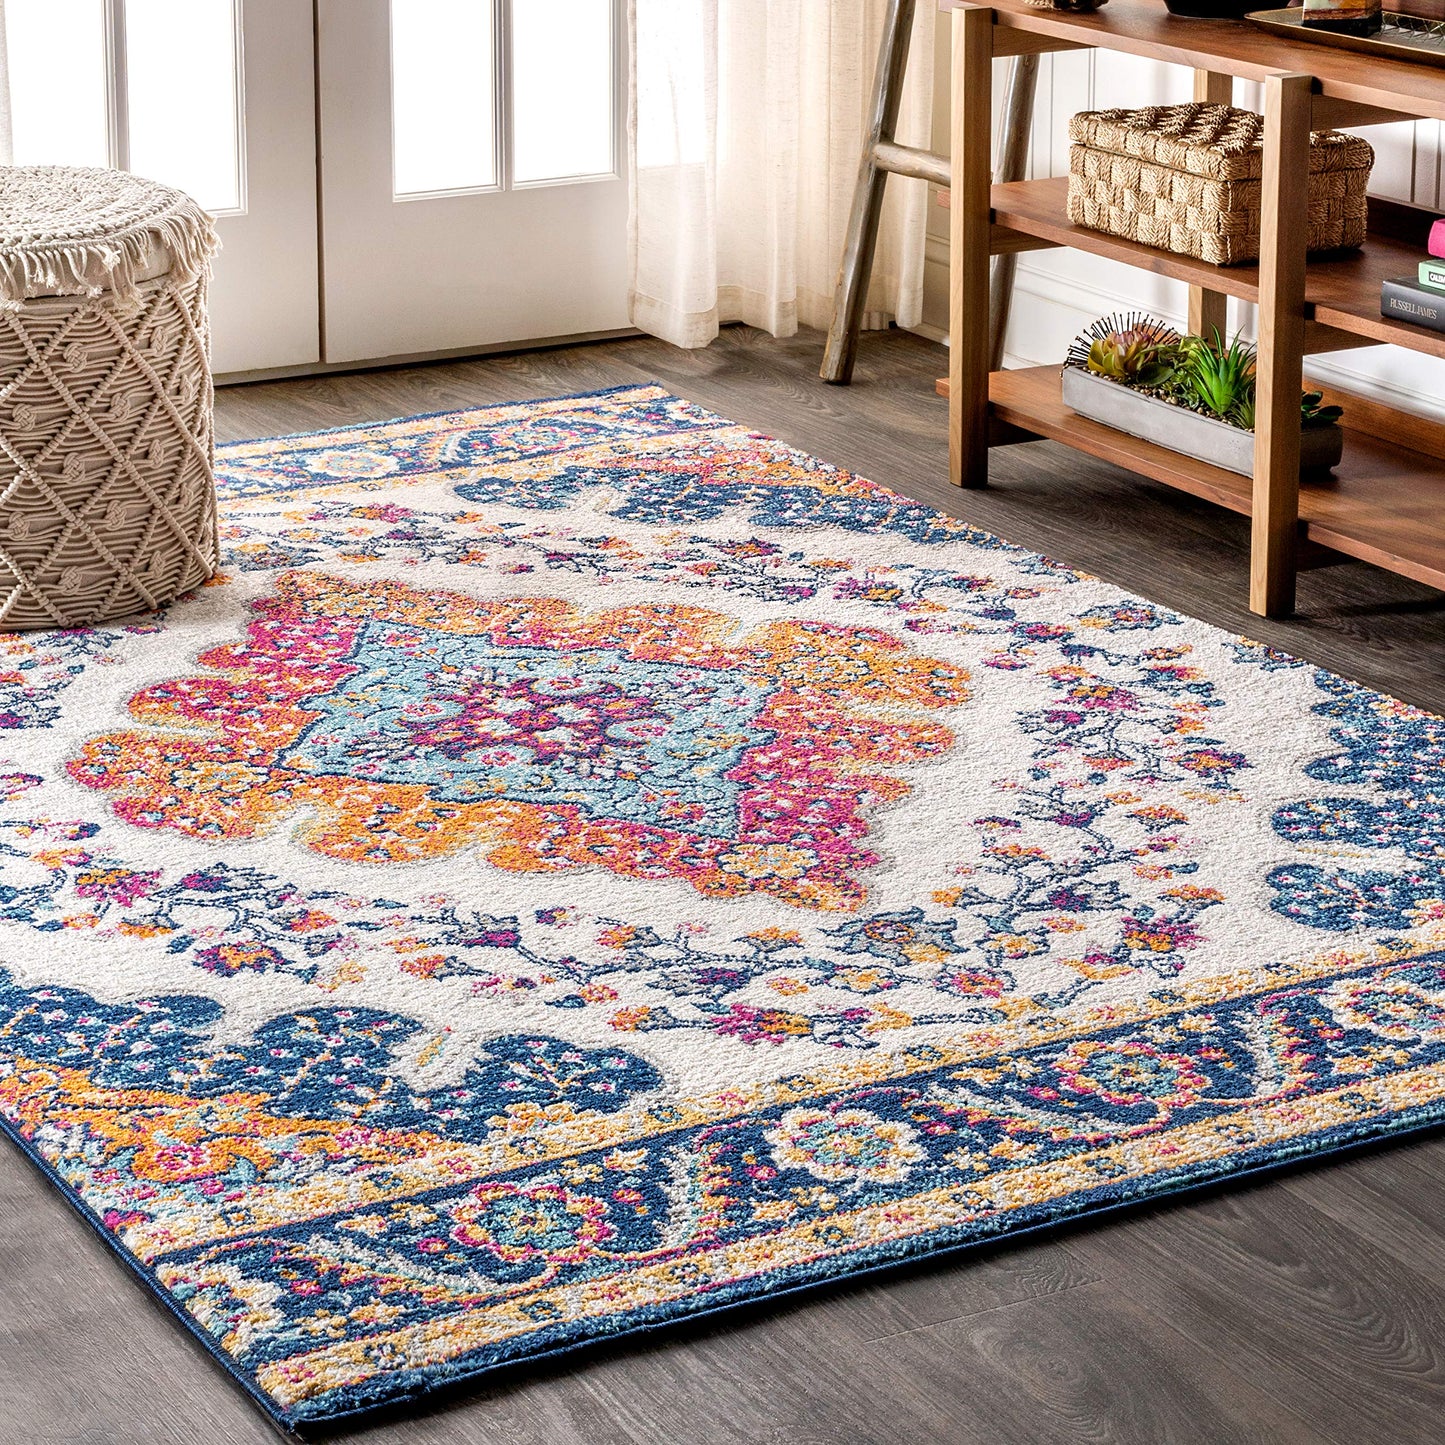 JONATHAN Y BMF106A-8 Bohemian Flair Boho Vintage Medallion Blue/Multi 8 ft. x 10 ft. Area-Rug, Vintage, Easy-Cleaning, for Bedroom, Kitchen, Living Room, Non Shedding